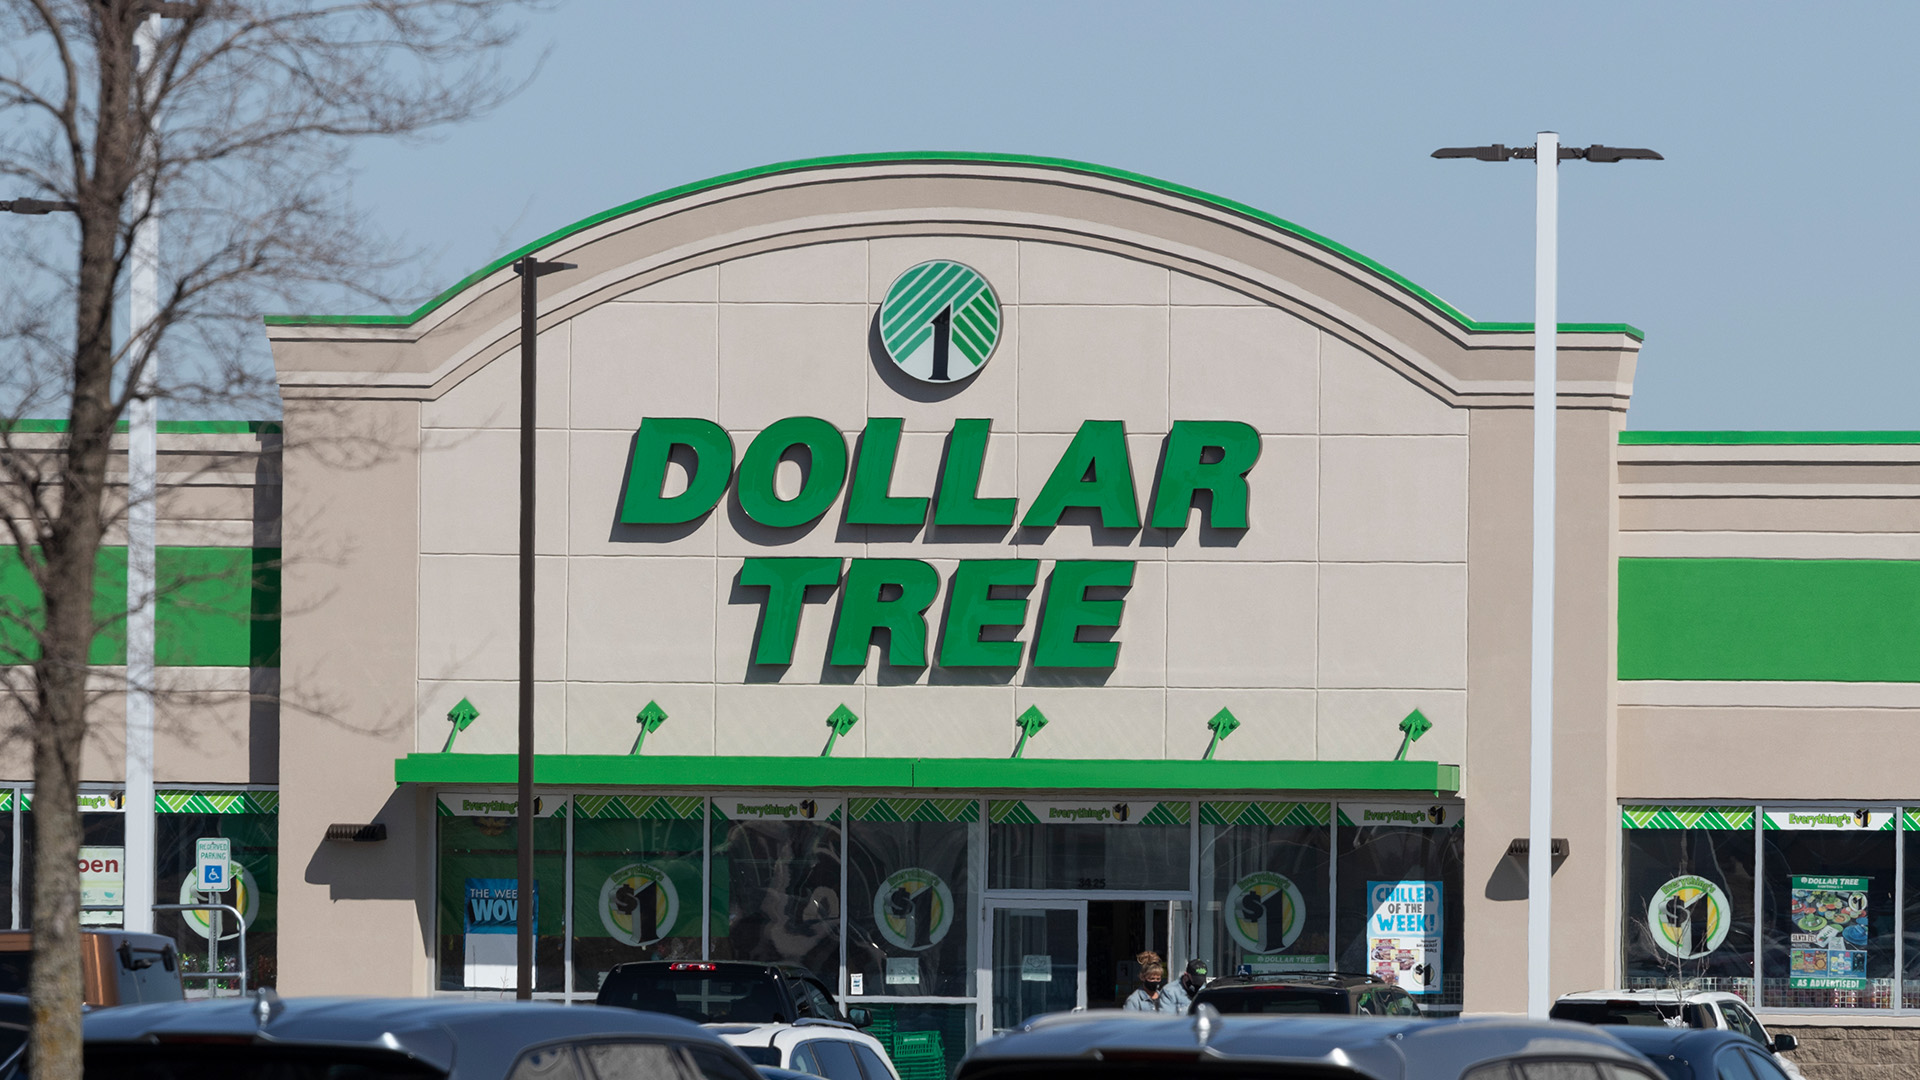 I am a Dollar Tree fan – my tips will make you apartment look luxurious and expensive without breaking your bank account